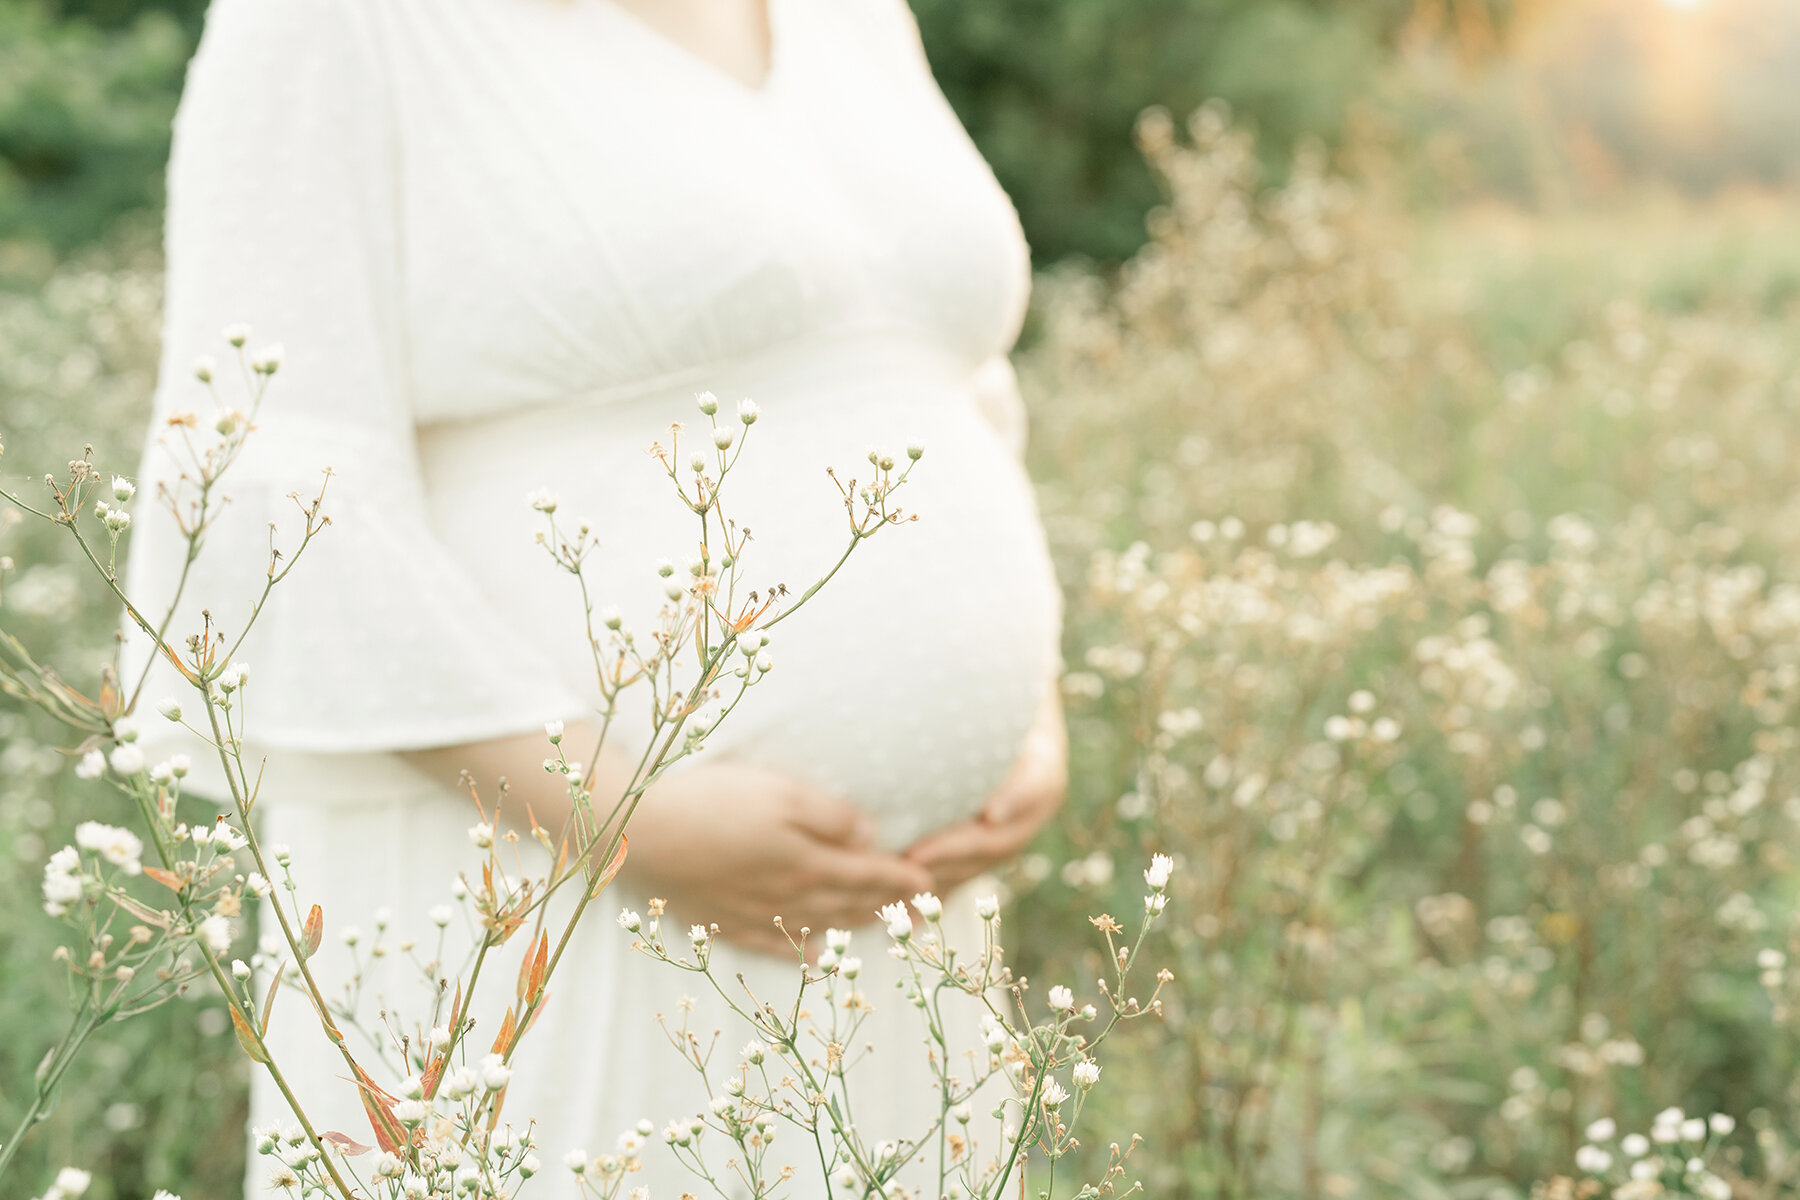 Simple light and airy maternity photo session in field of white flowers - Louisville KY Julie Brock Photography